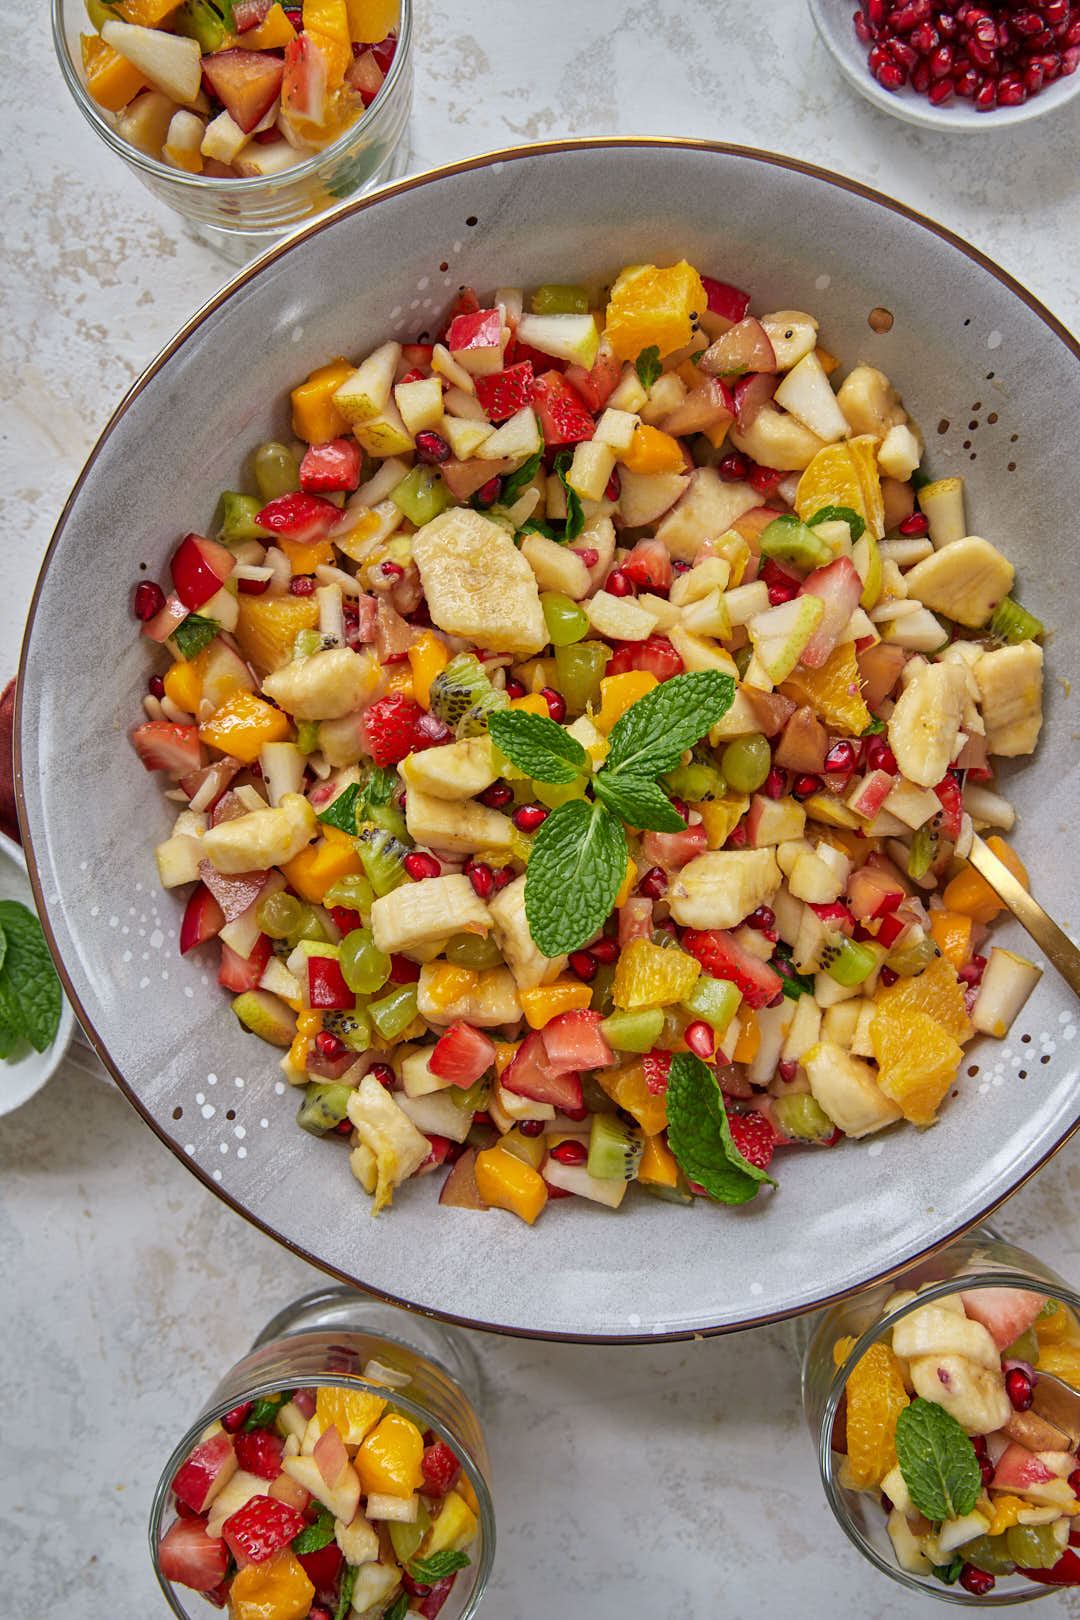 lebanese fruit salad with citrus dressing in large gray bowl, with small portions of fruit salad surrounding it.